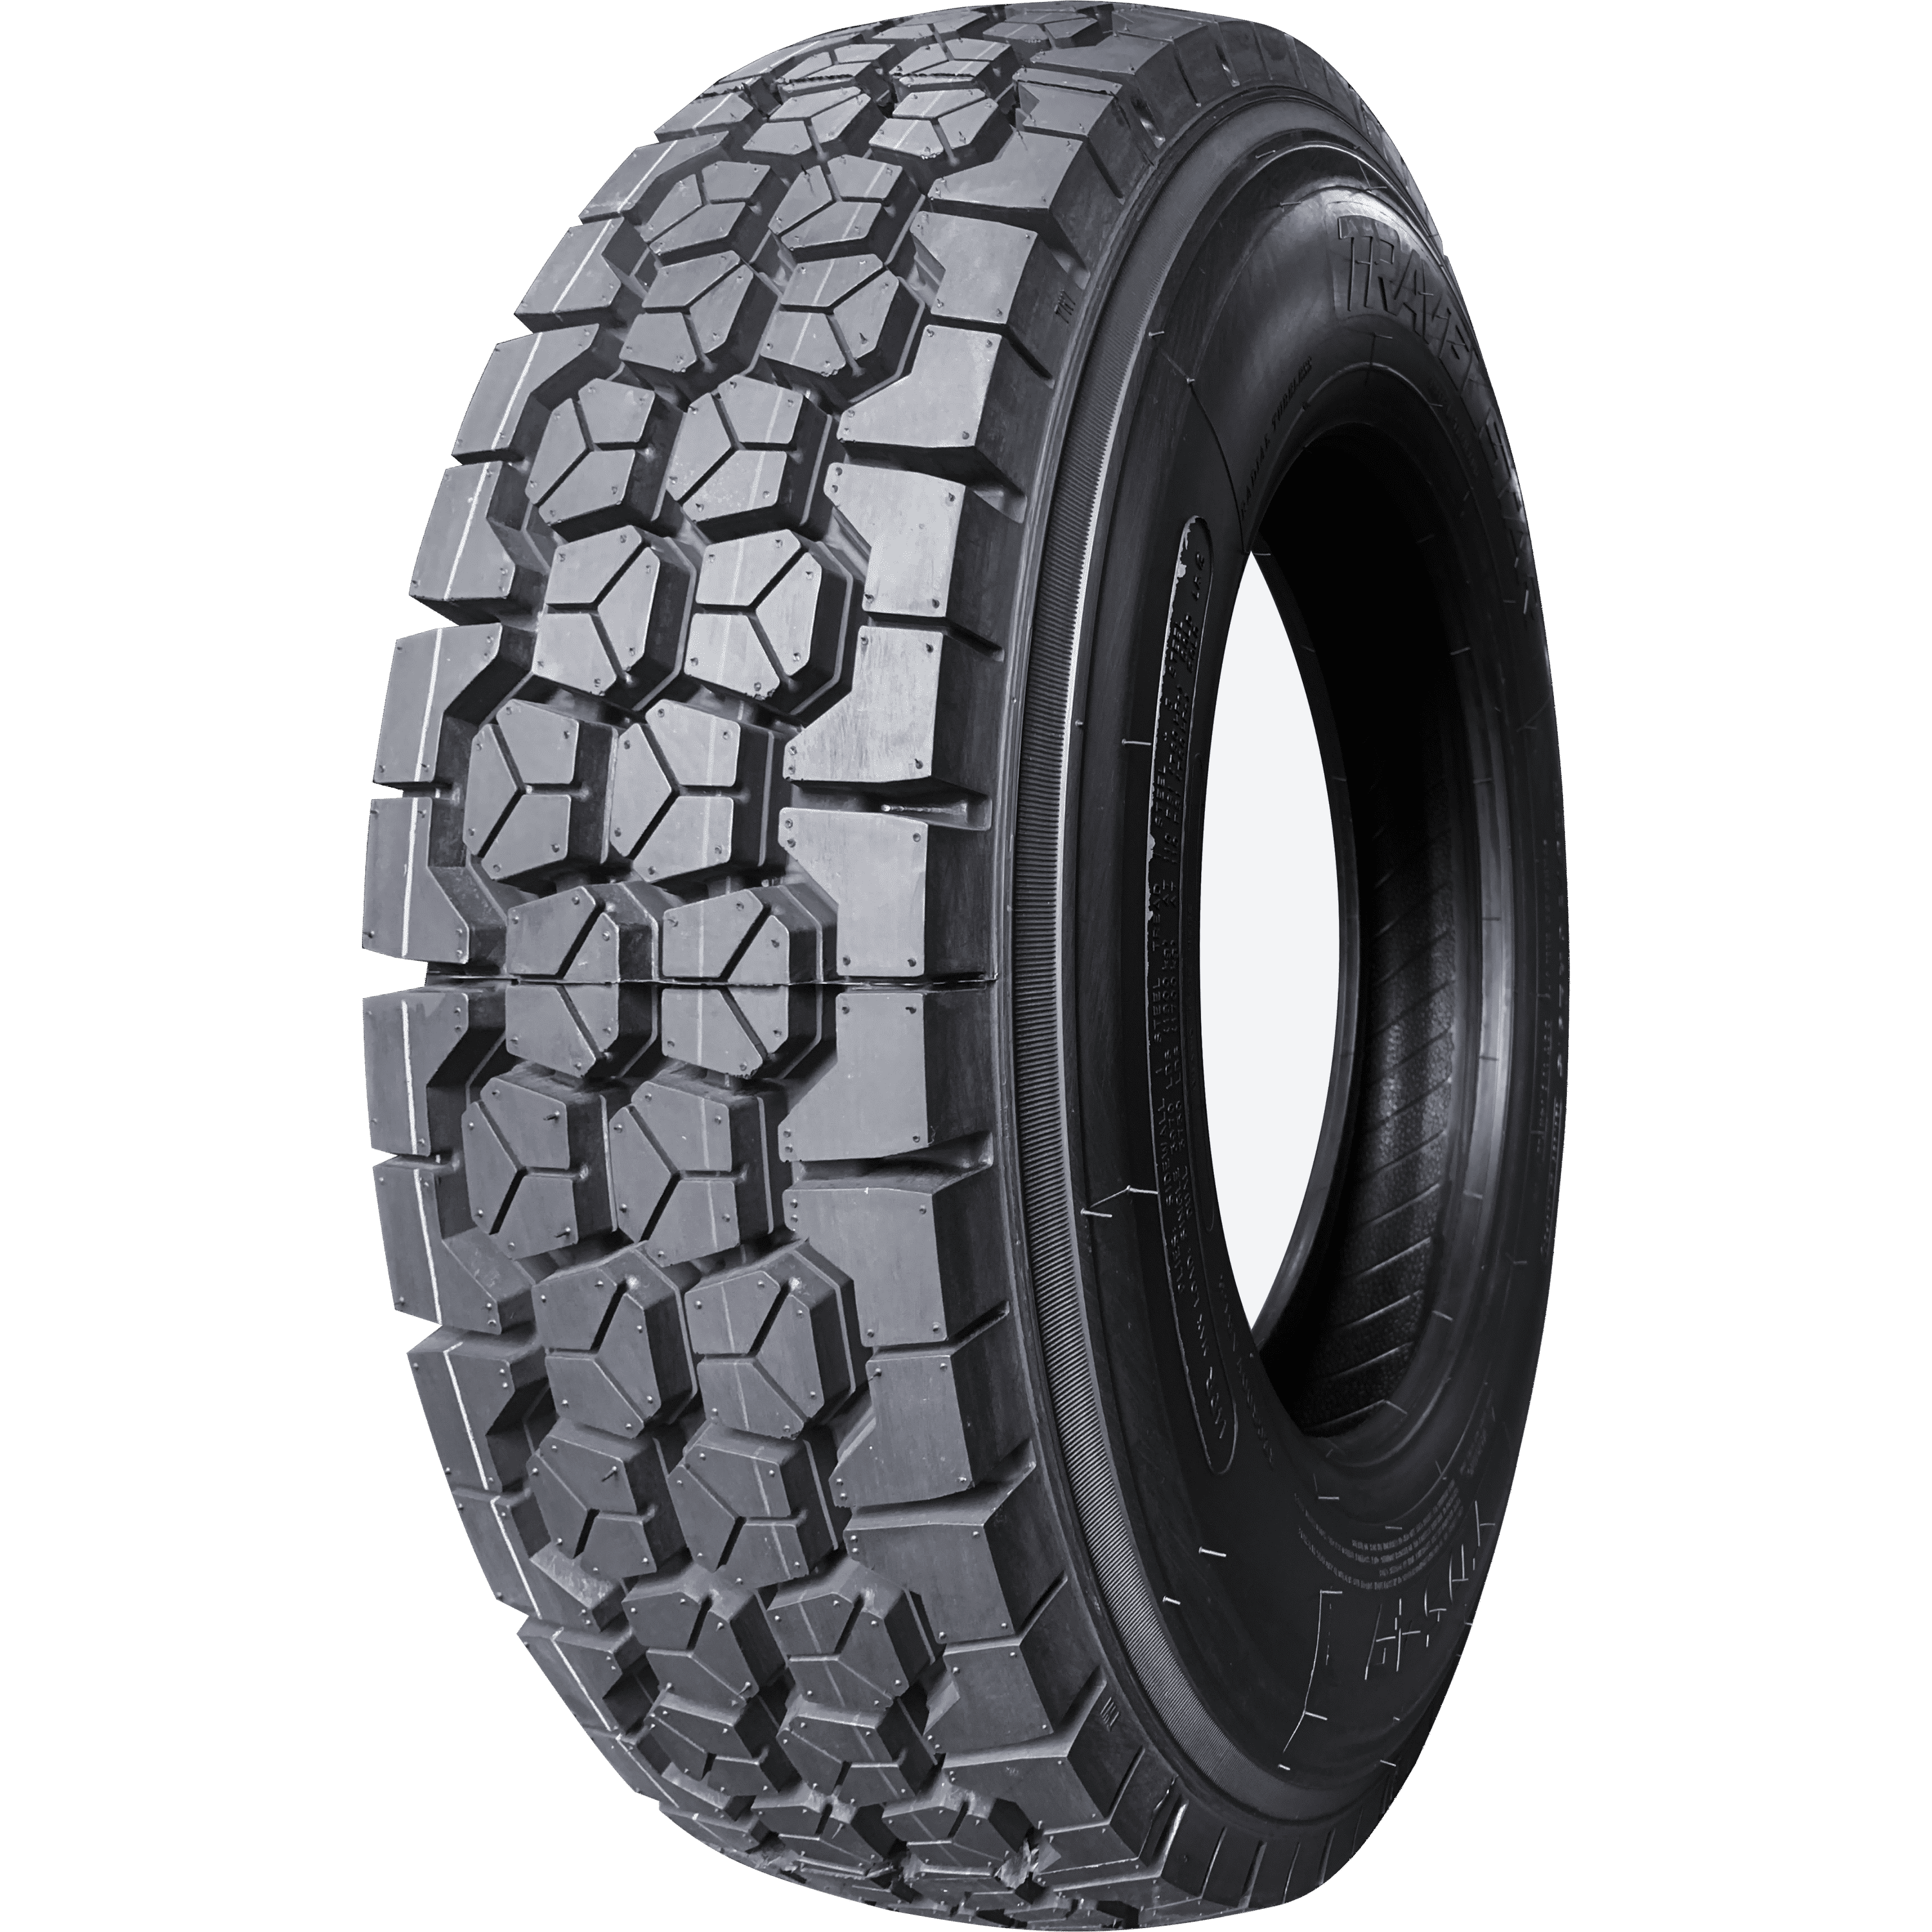 Travelstar TD547 225/ Drive Tire 128/126 M 14 Ply Load Range G Drive  Position Radial Commercial Truck Tires 225/70/ 